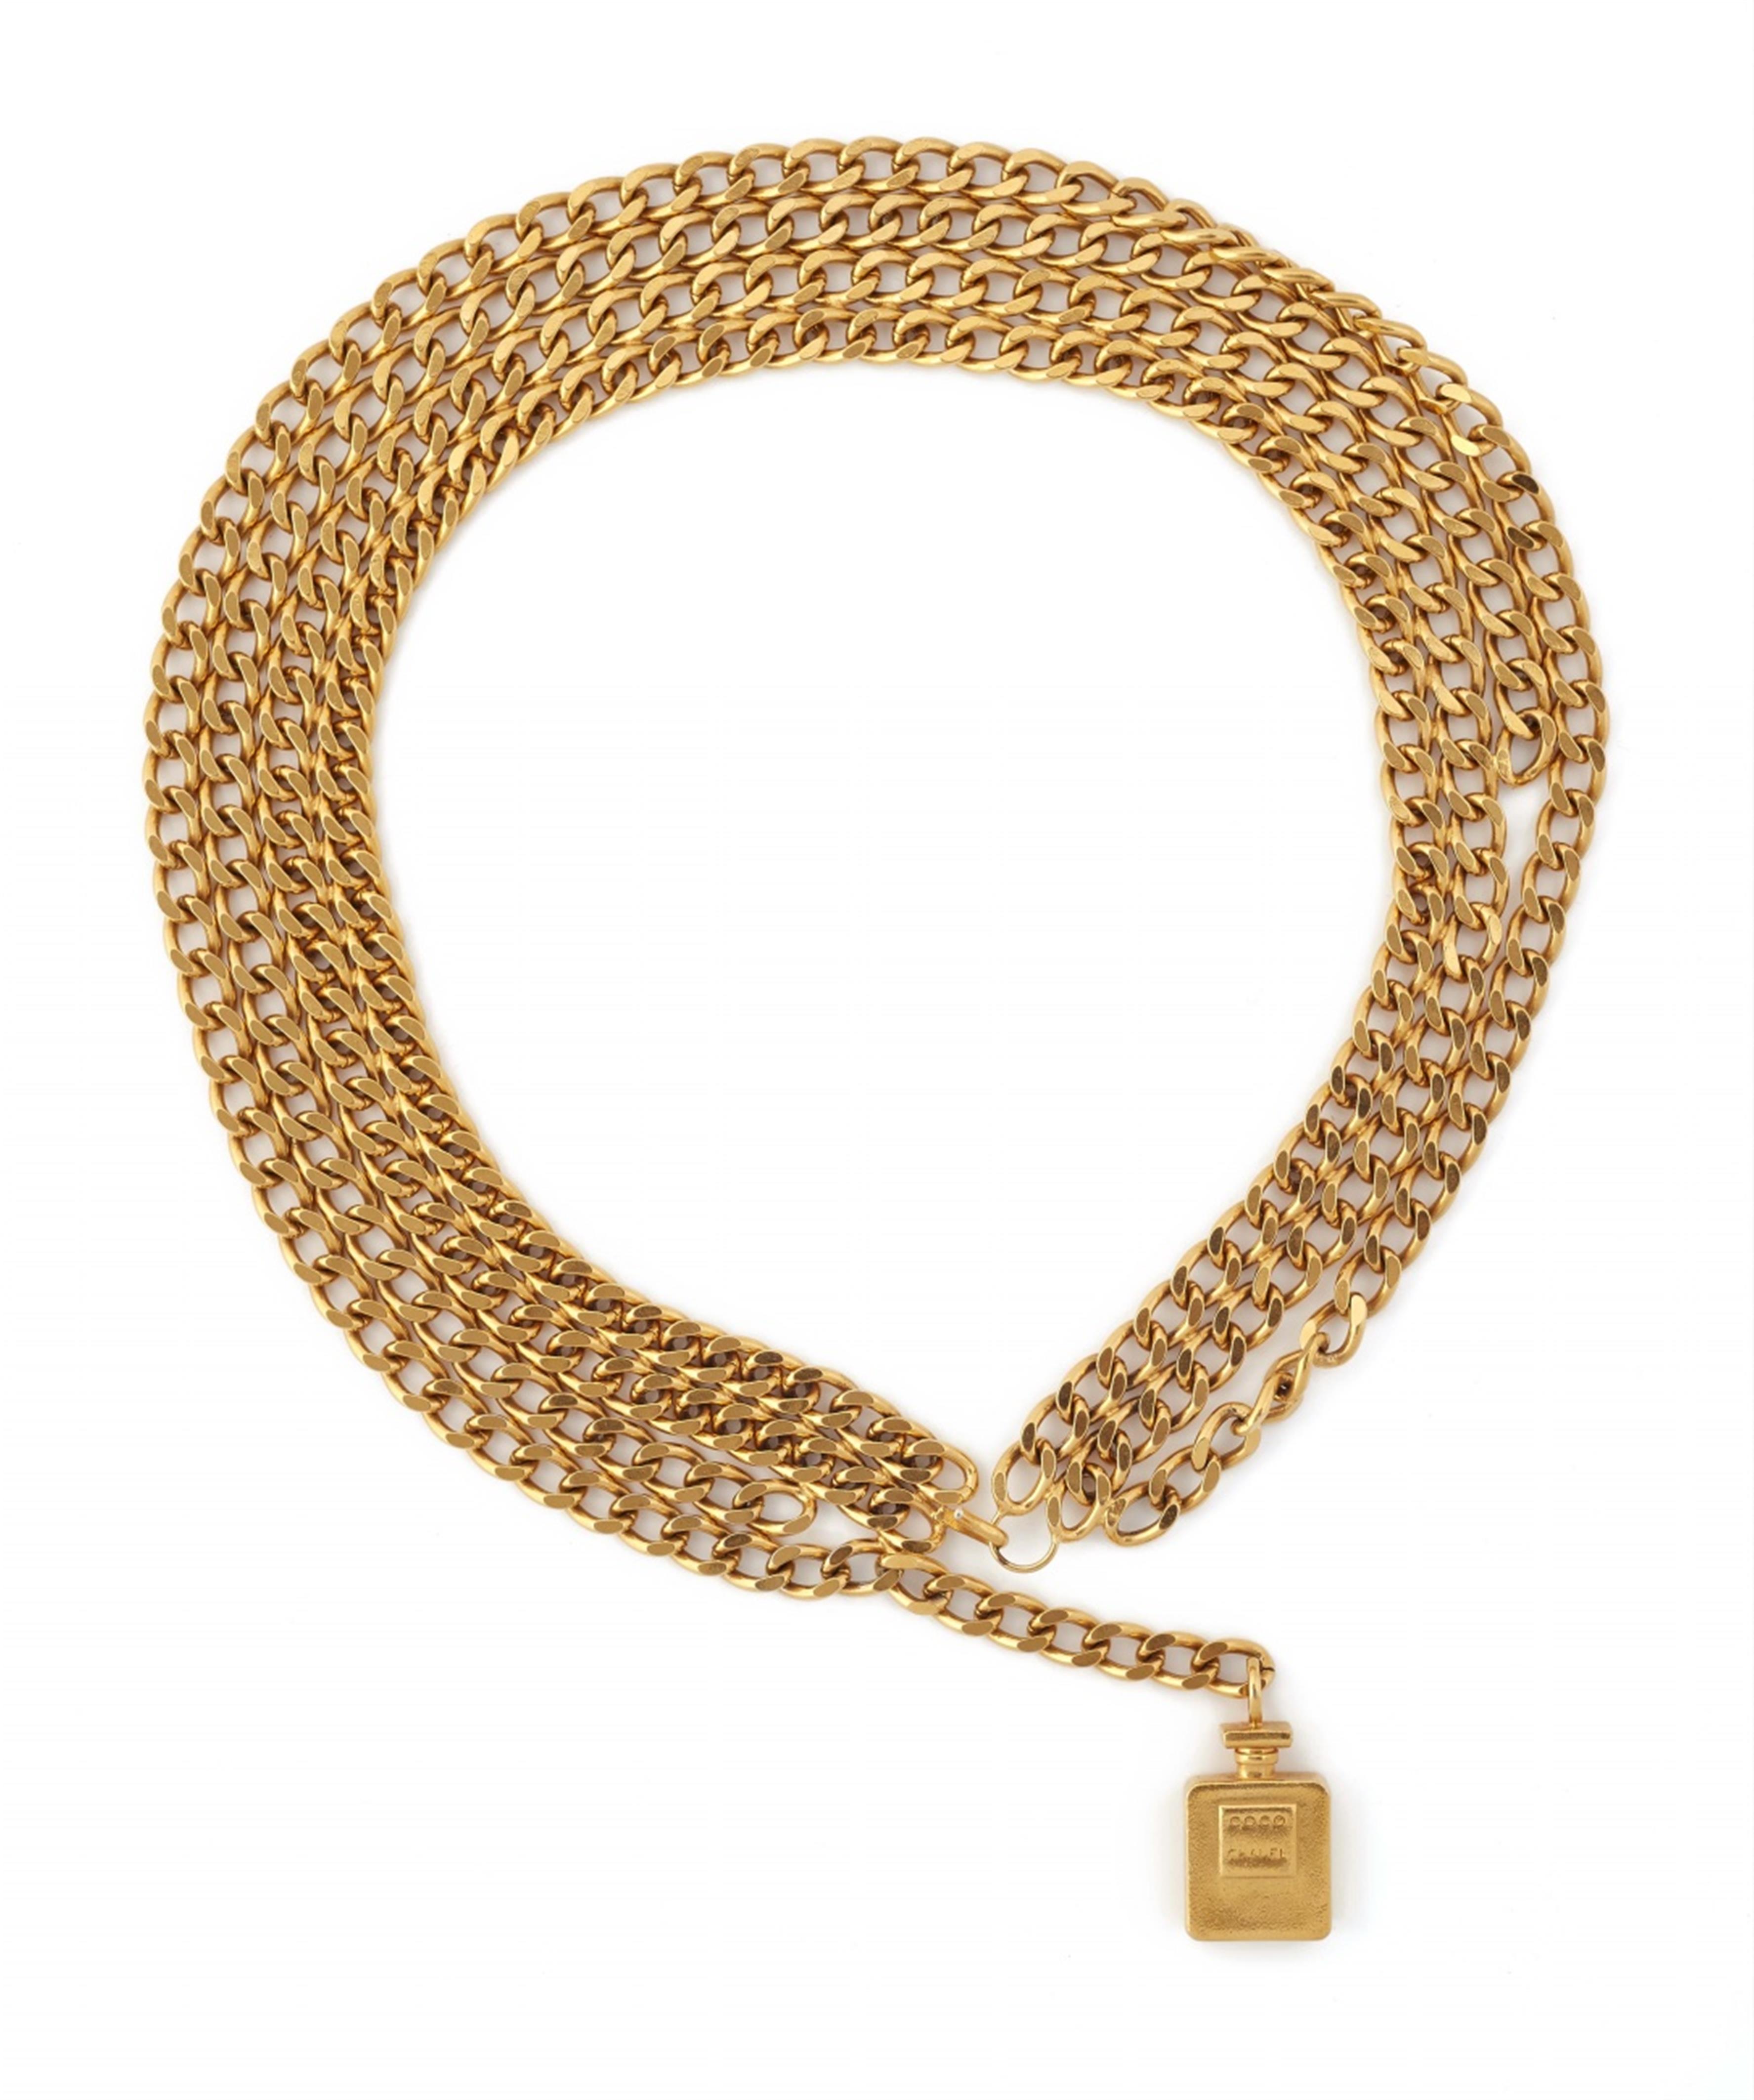 A Chanel chain belt with a perfume bottle charm, Autumn 1982 - image-1